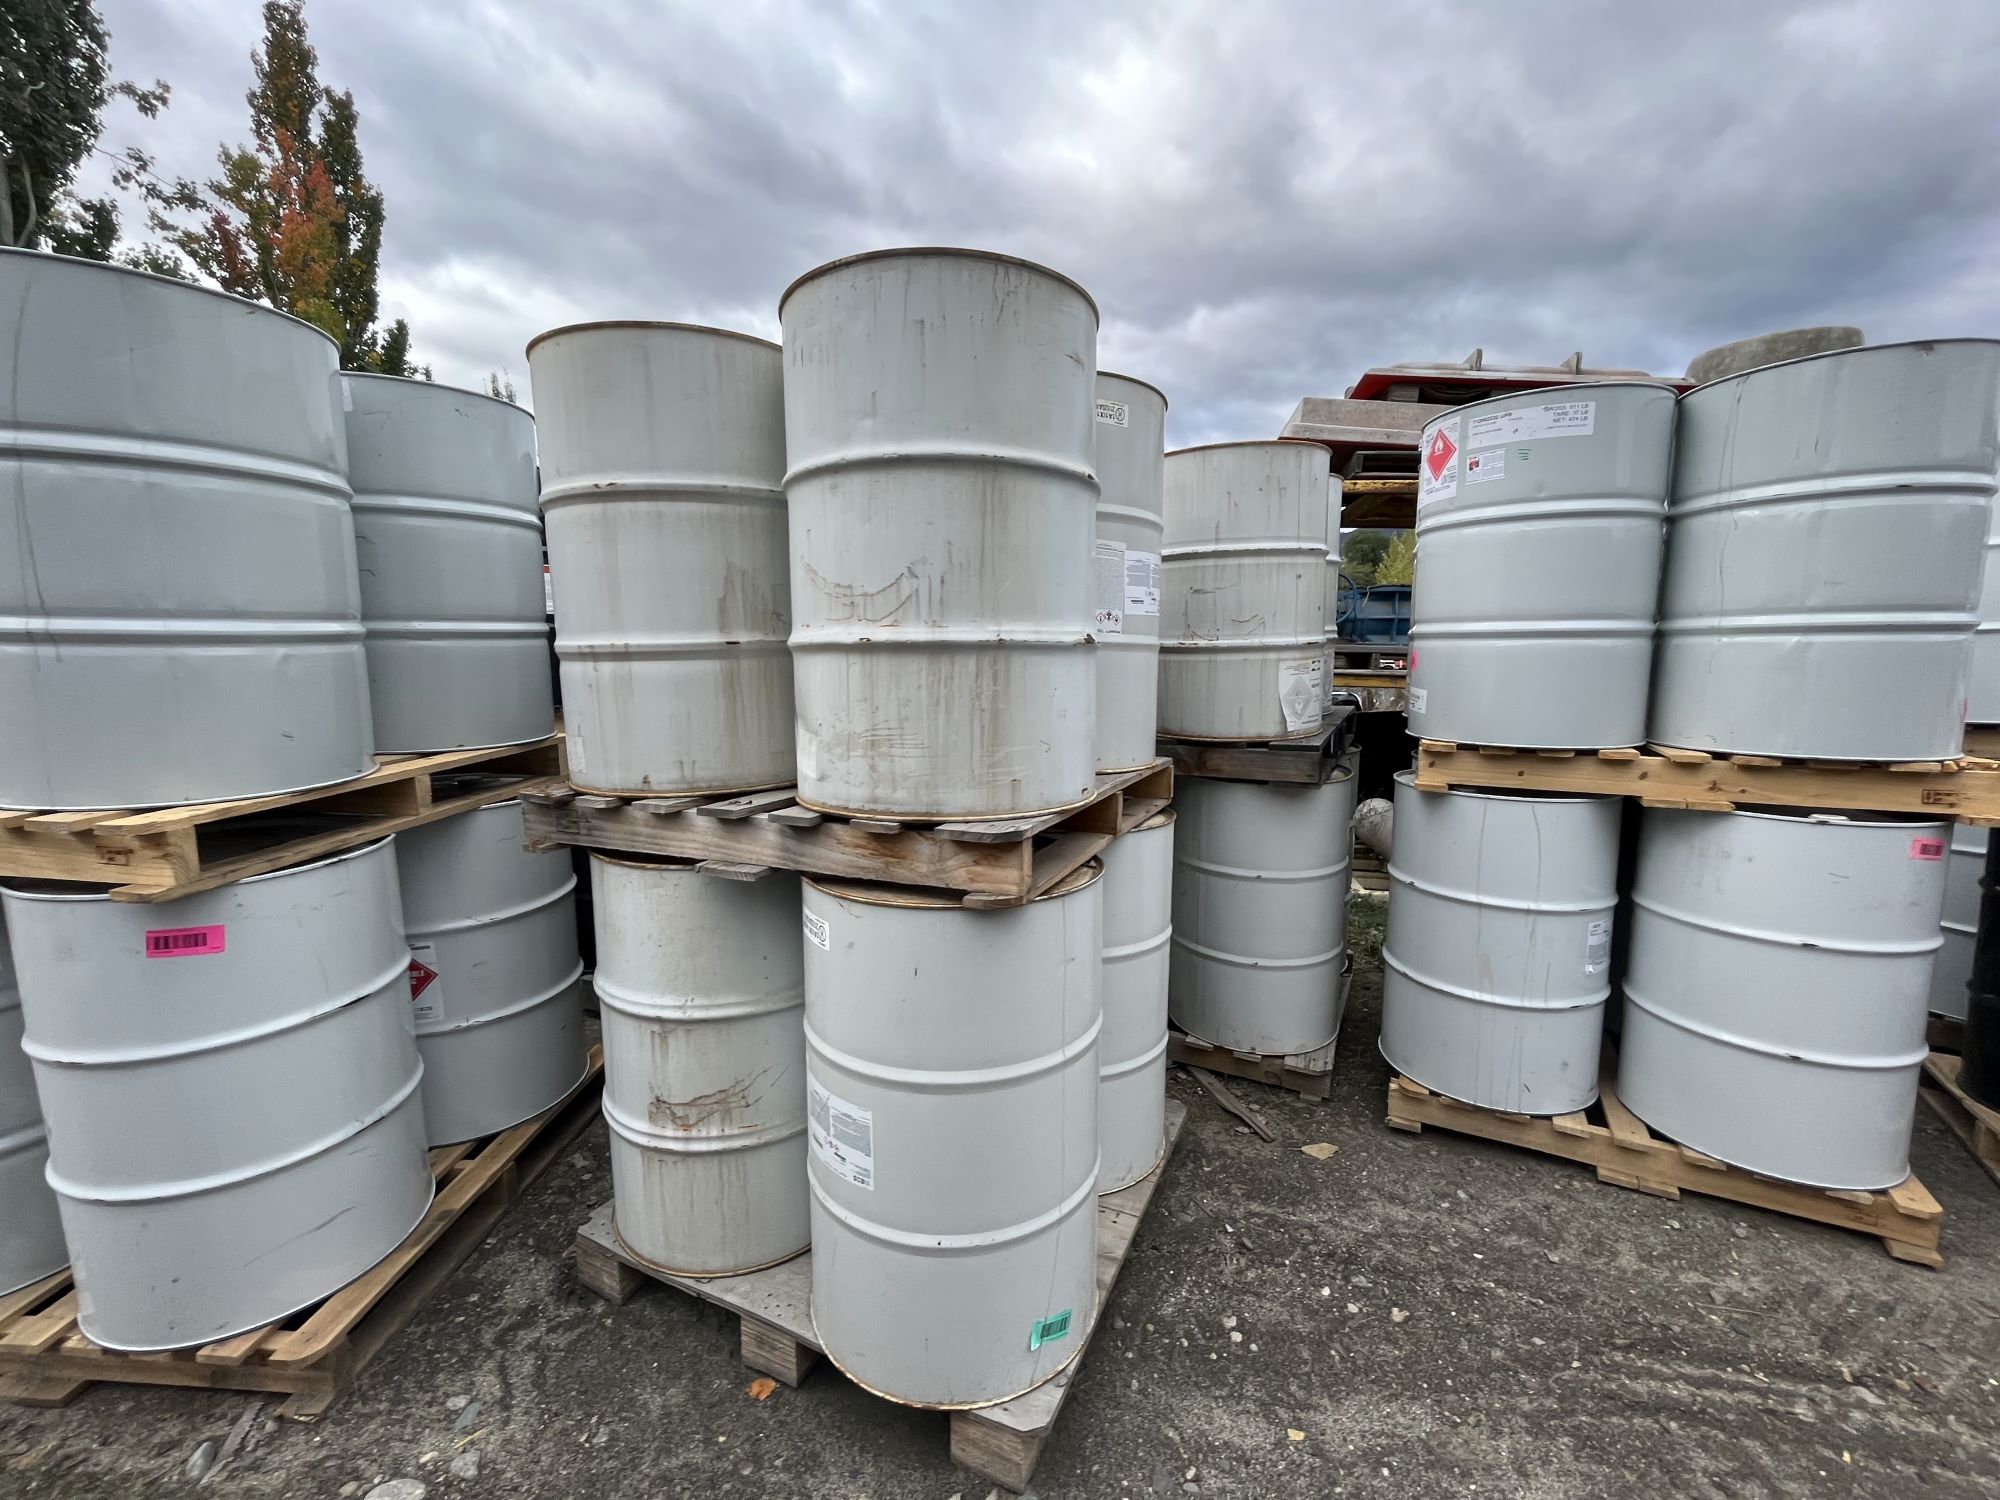 Barrel storage on an industrial site in the Okanagan. There are no apparent concerns from this practice the operators are running a clean operation here